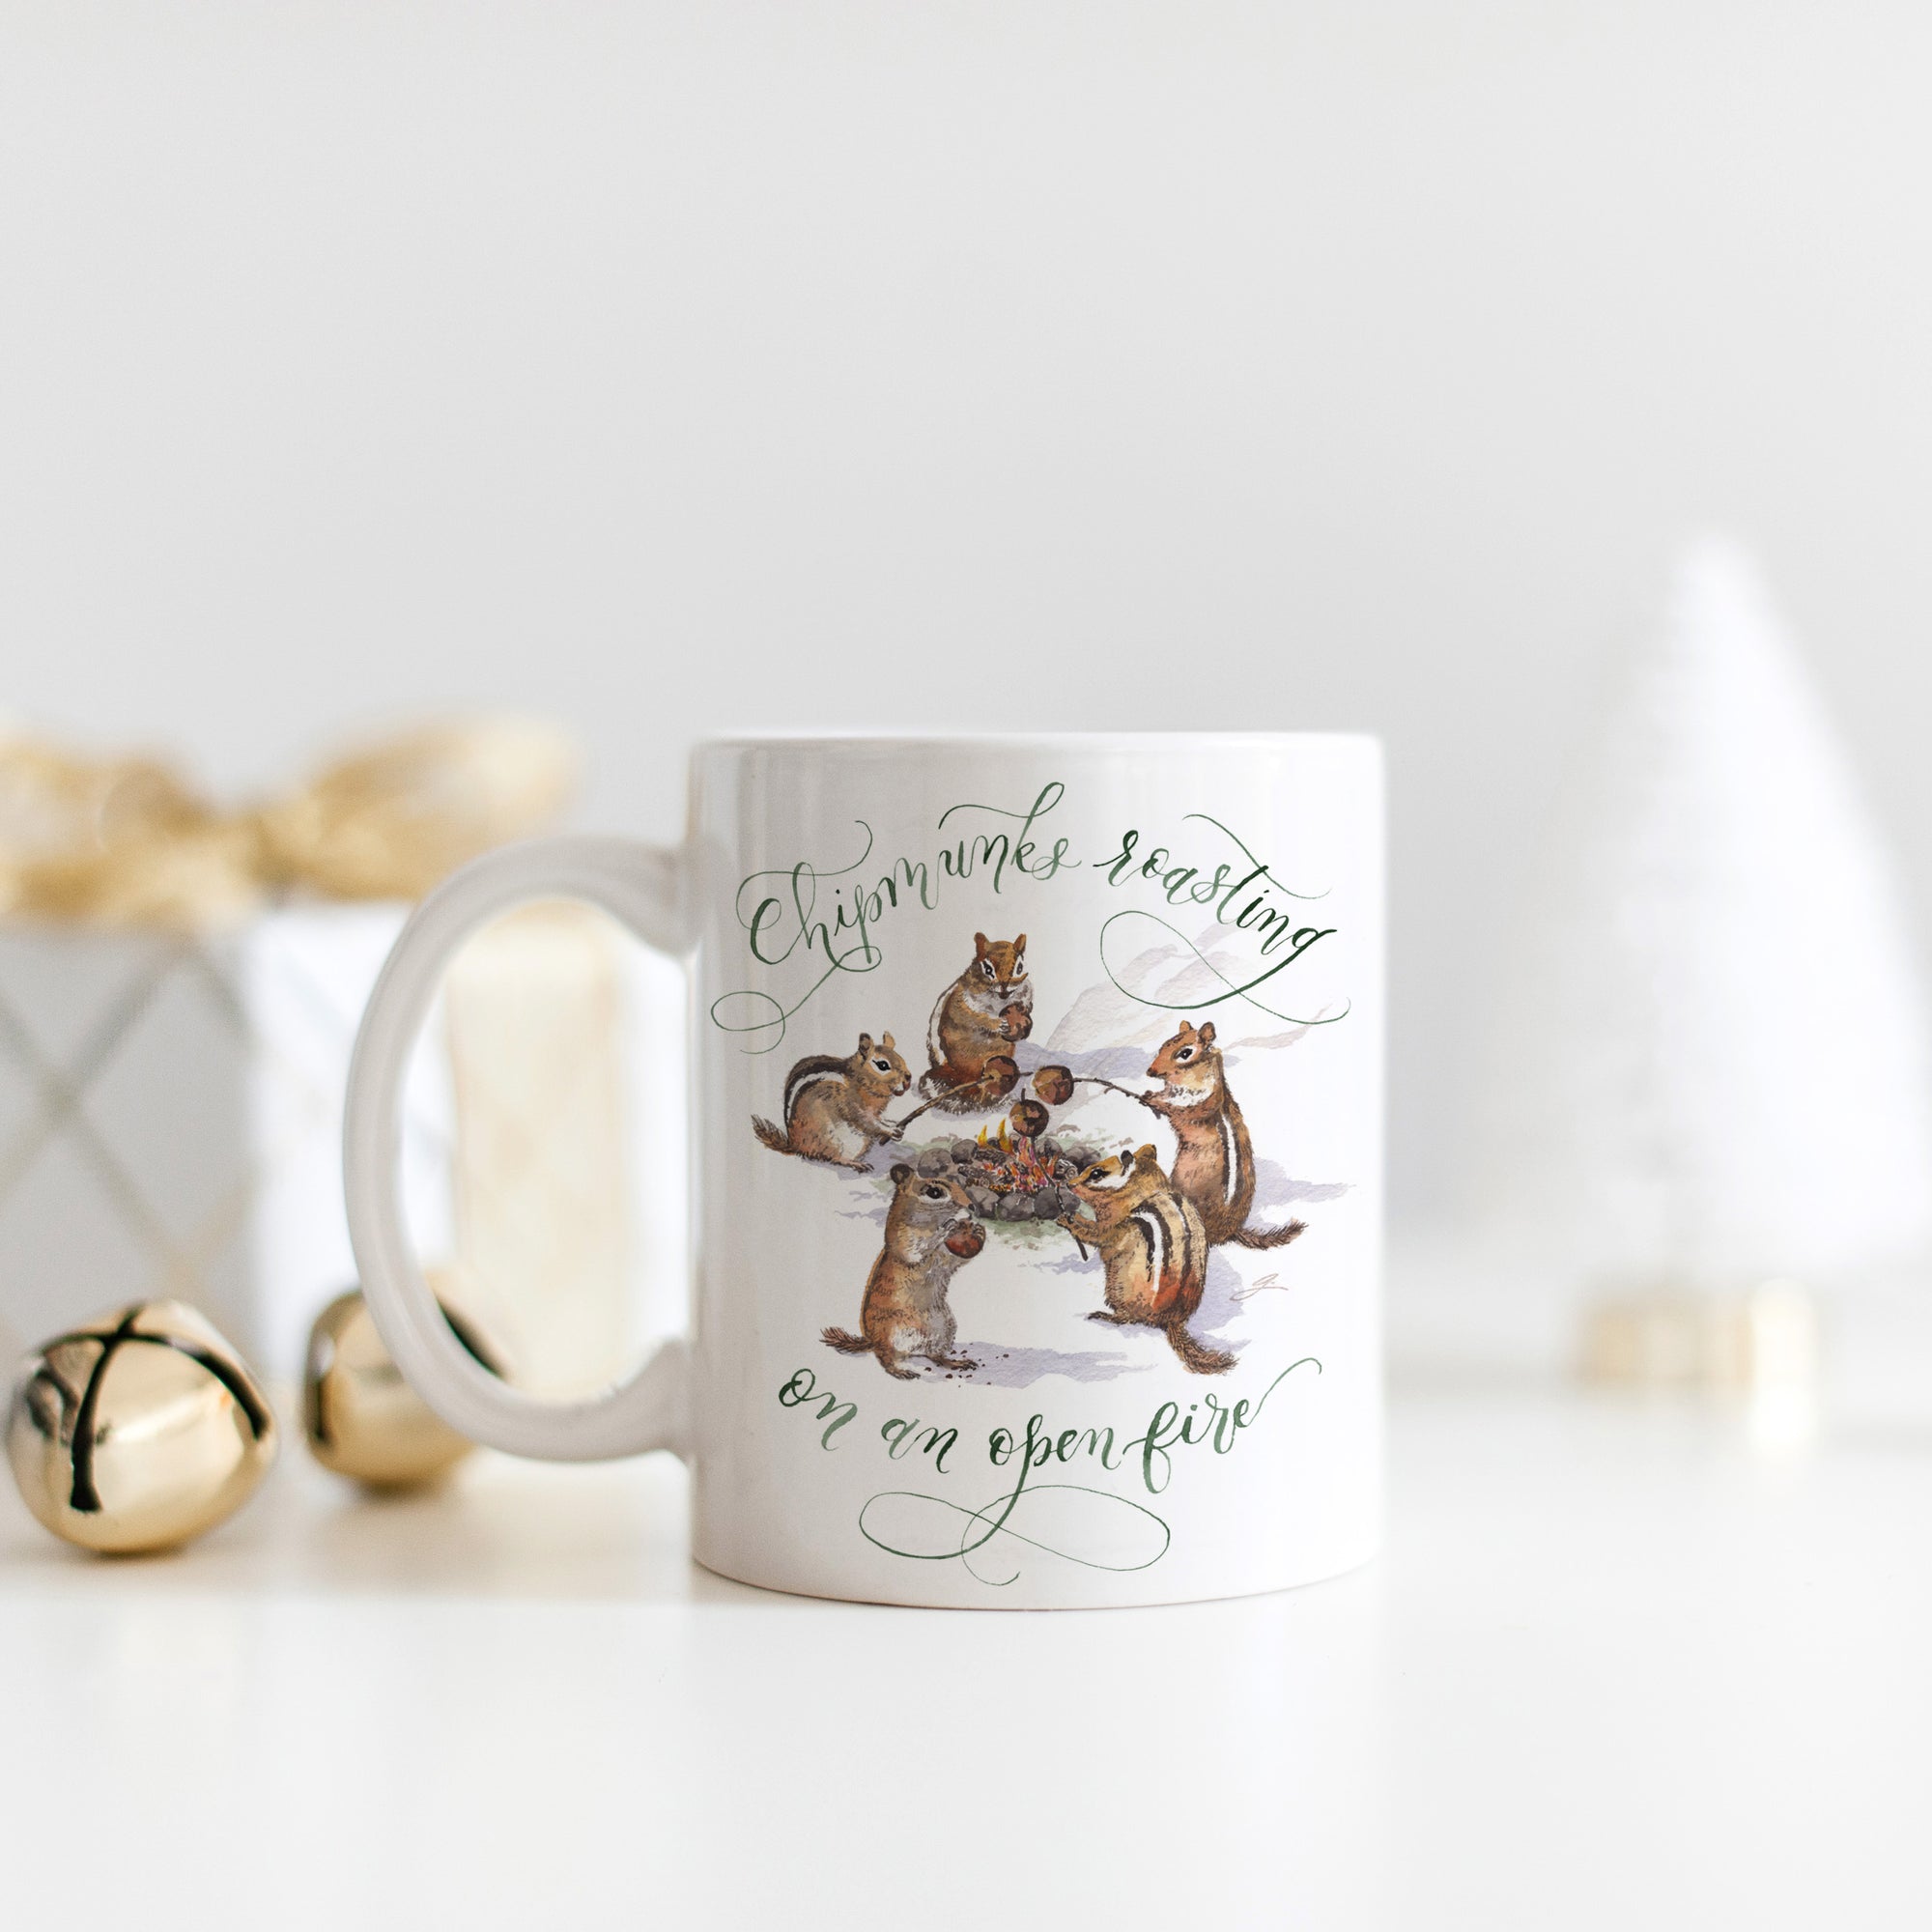 Chipmunks Roasting on an Open Fire Mug | Father-Daughter Collaboration